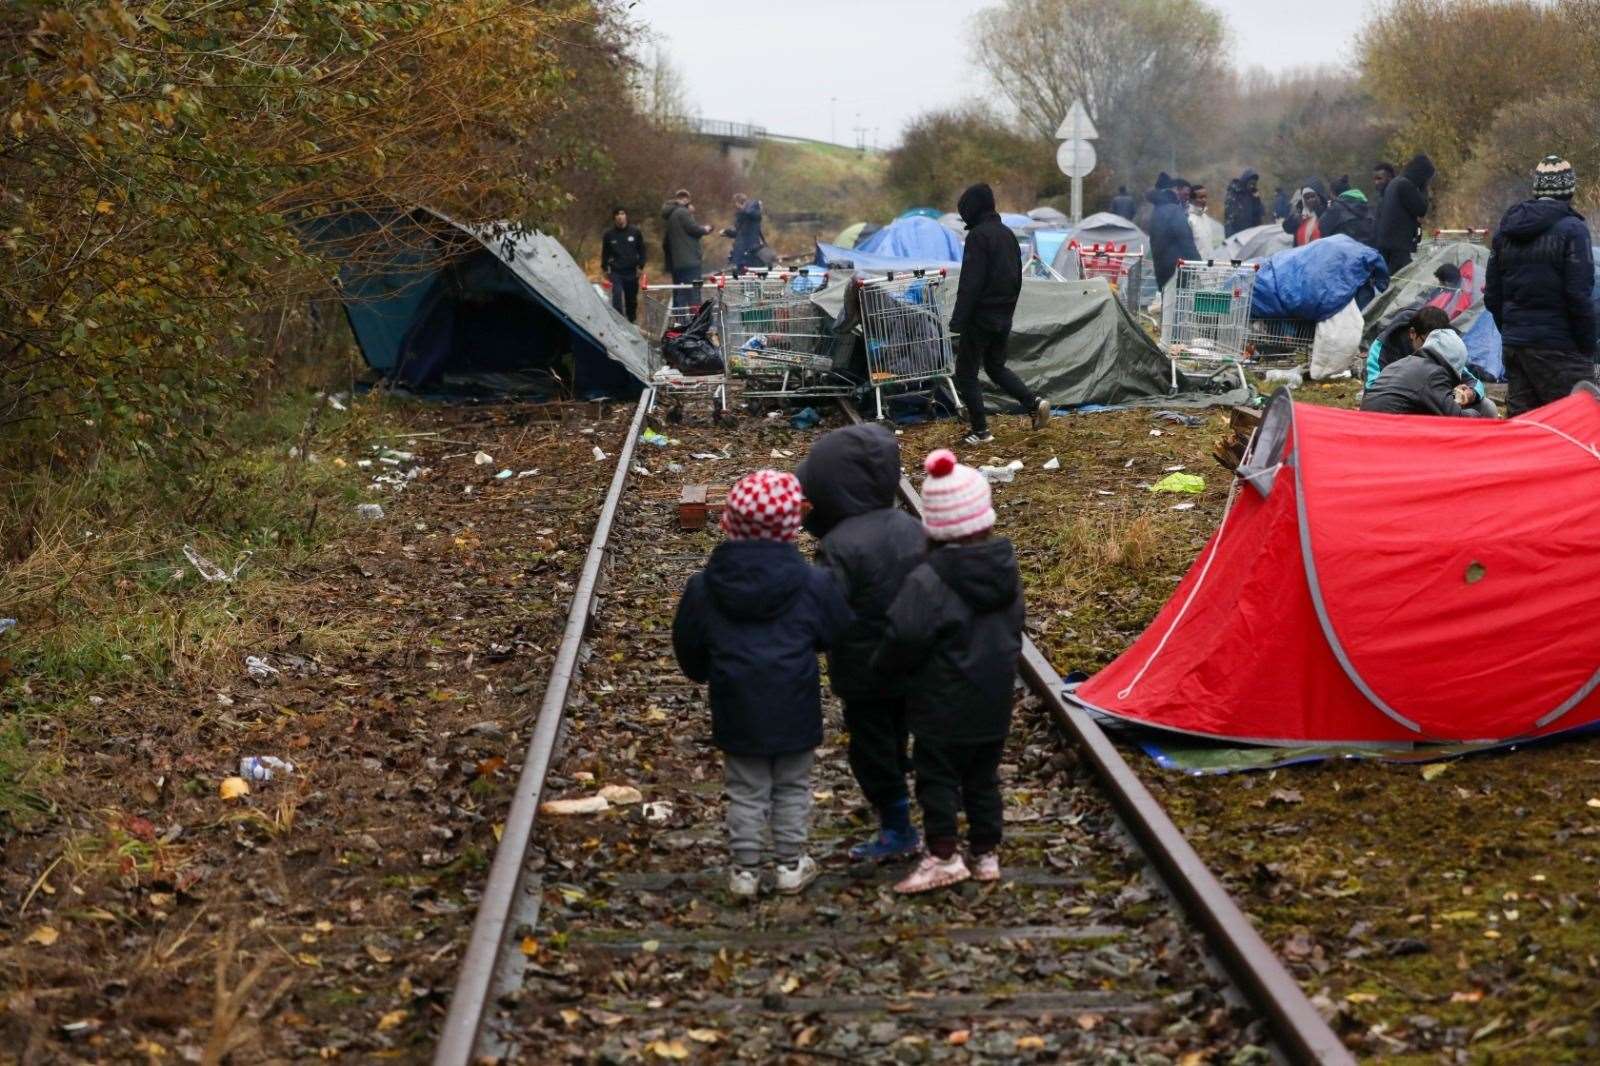 Asylum seekers at a camp in France. Picture: UKNIP